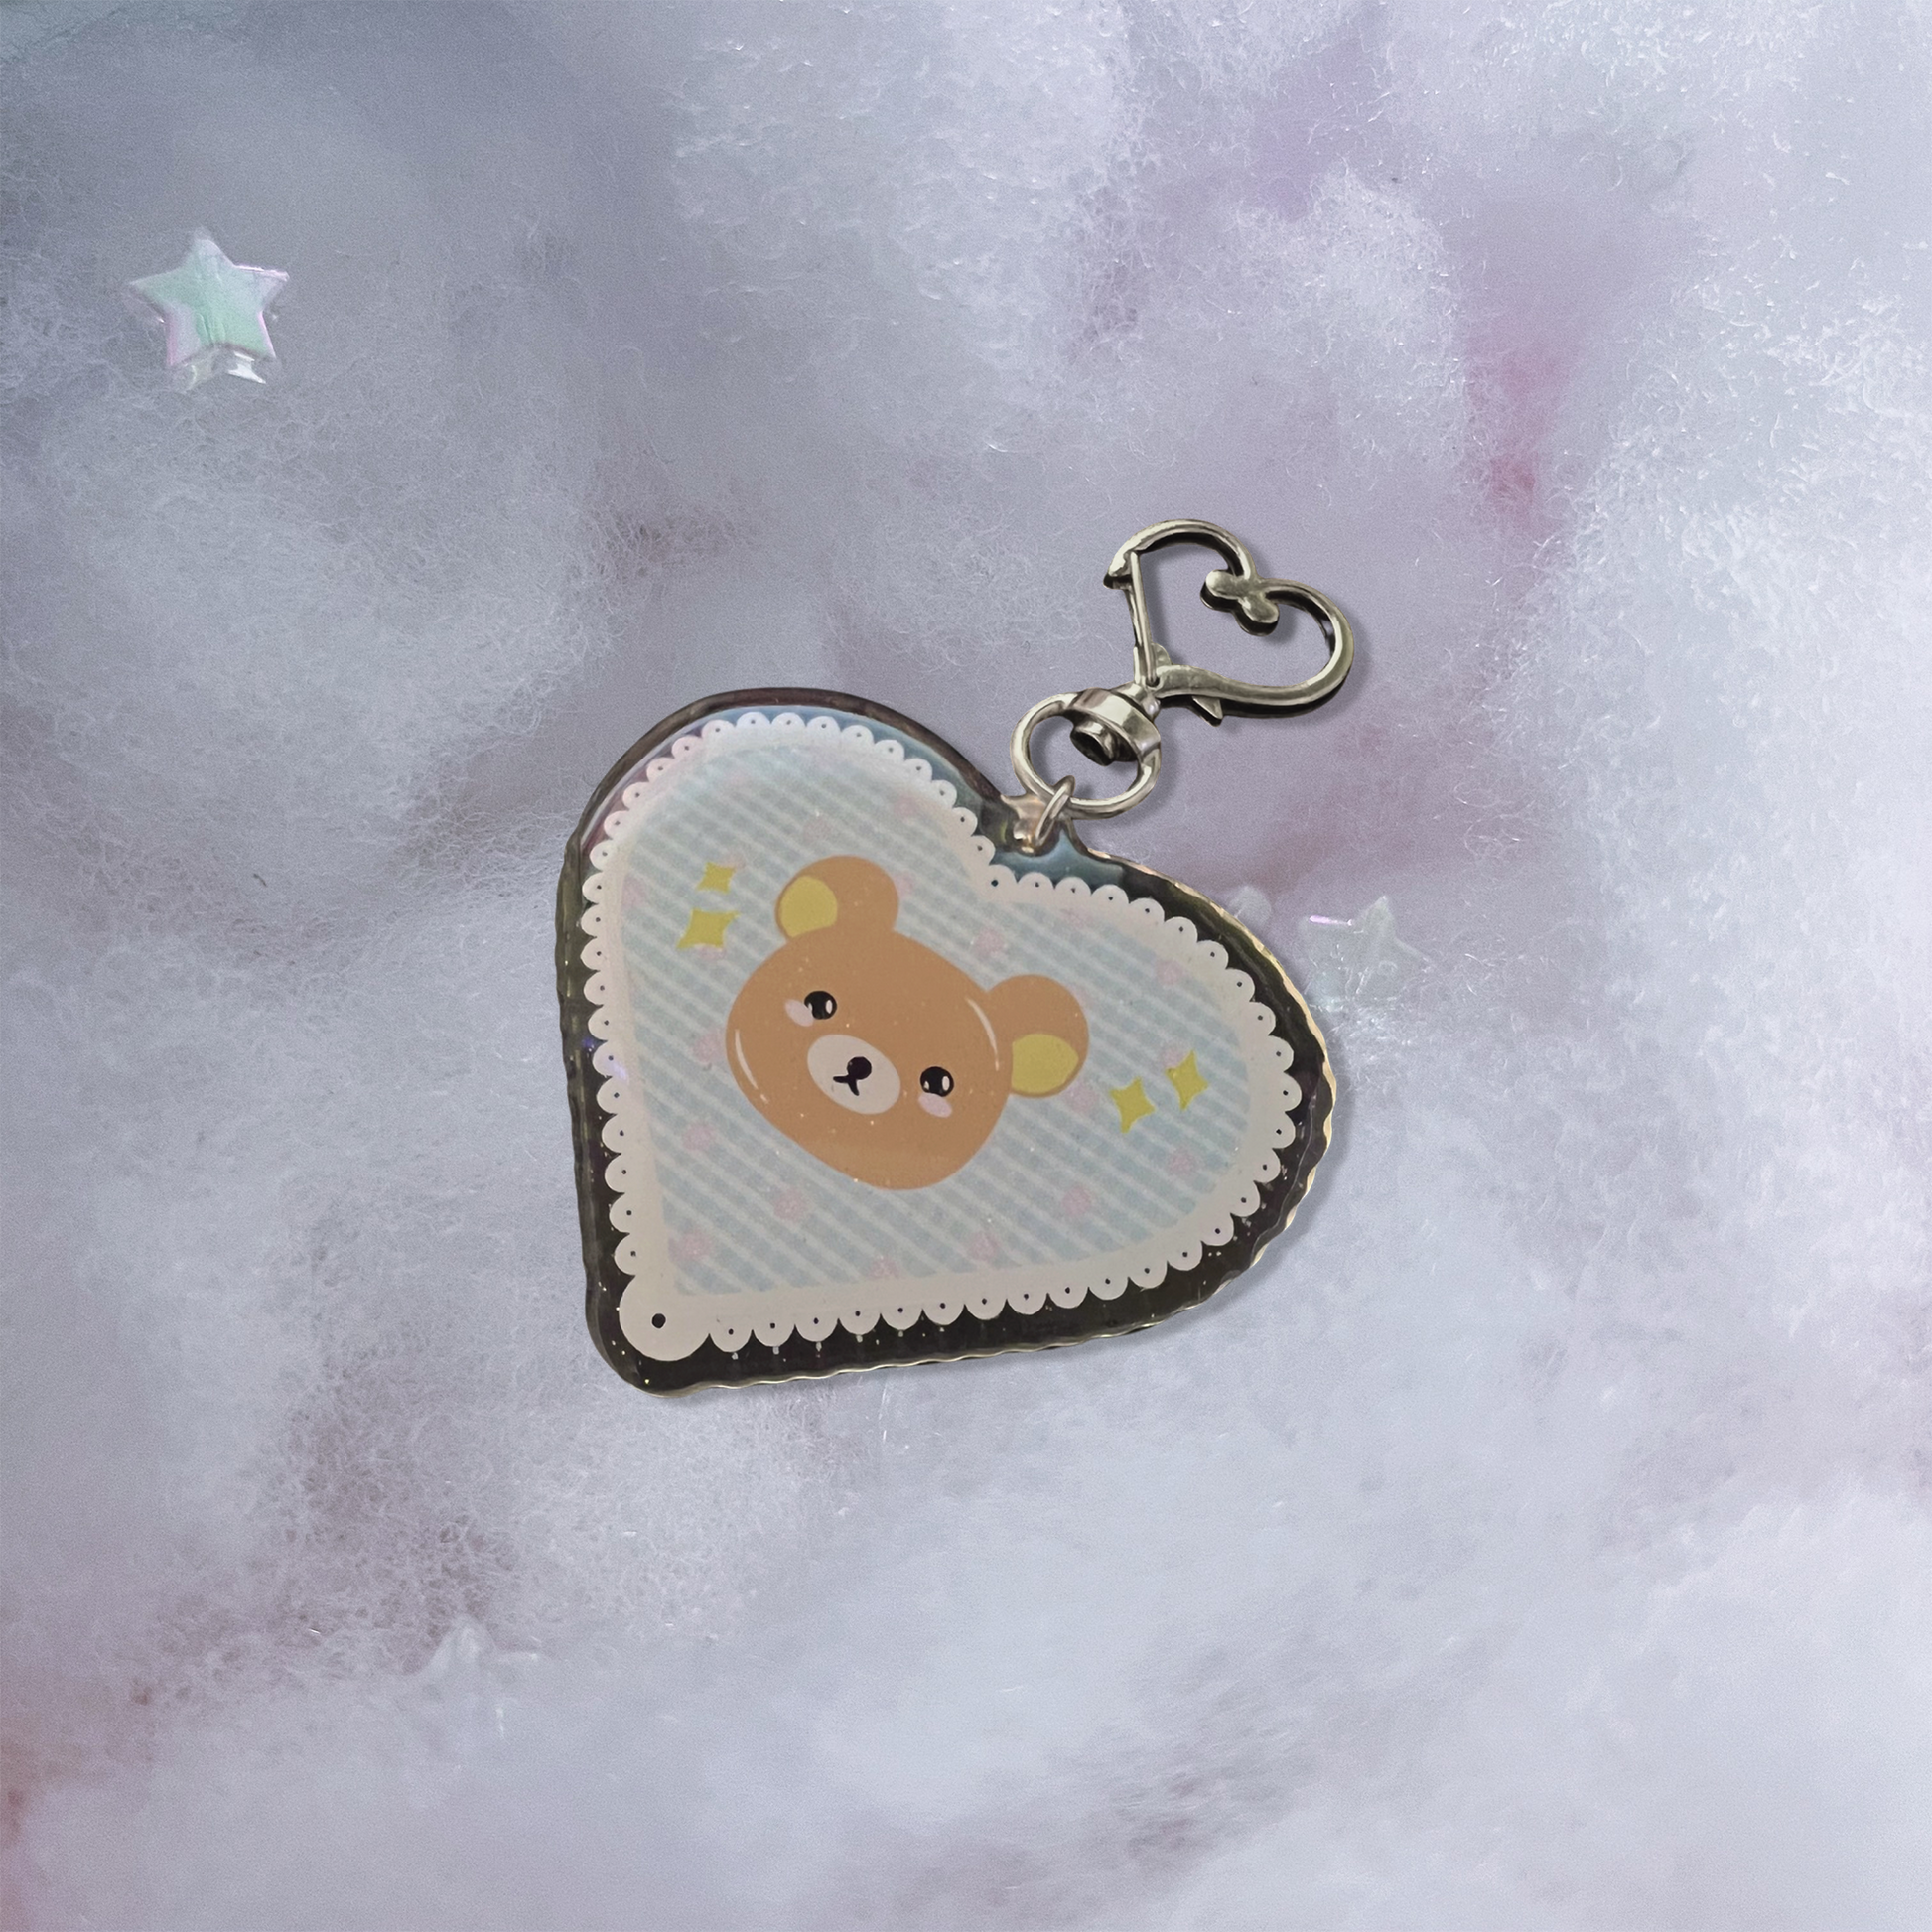 Brown bear acrylic keychain with micro-glitter finish and silver heart hook.